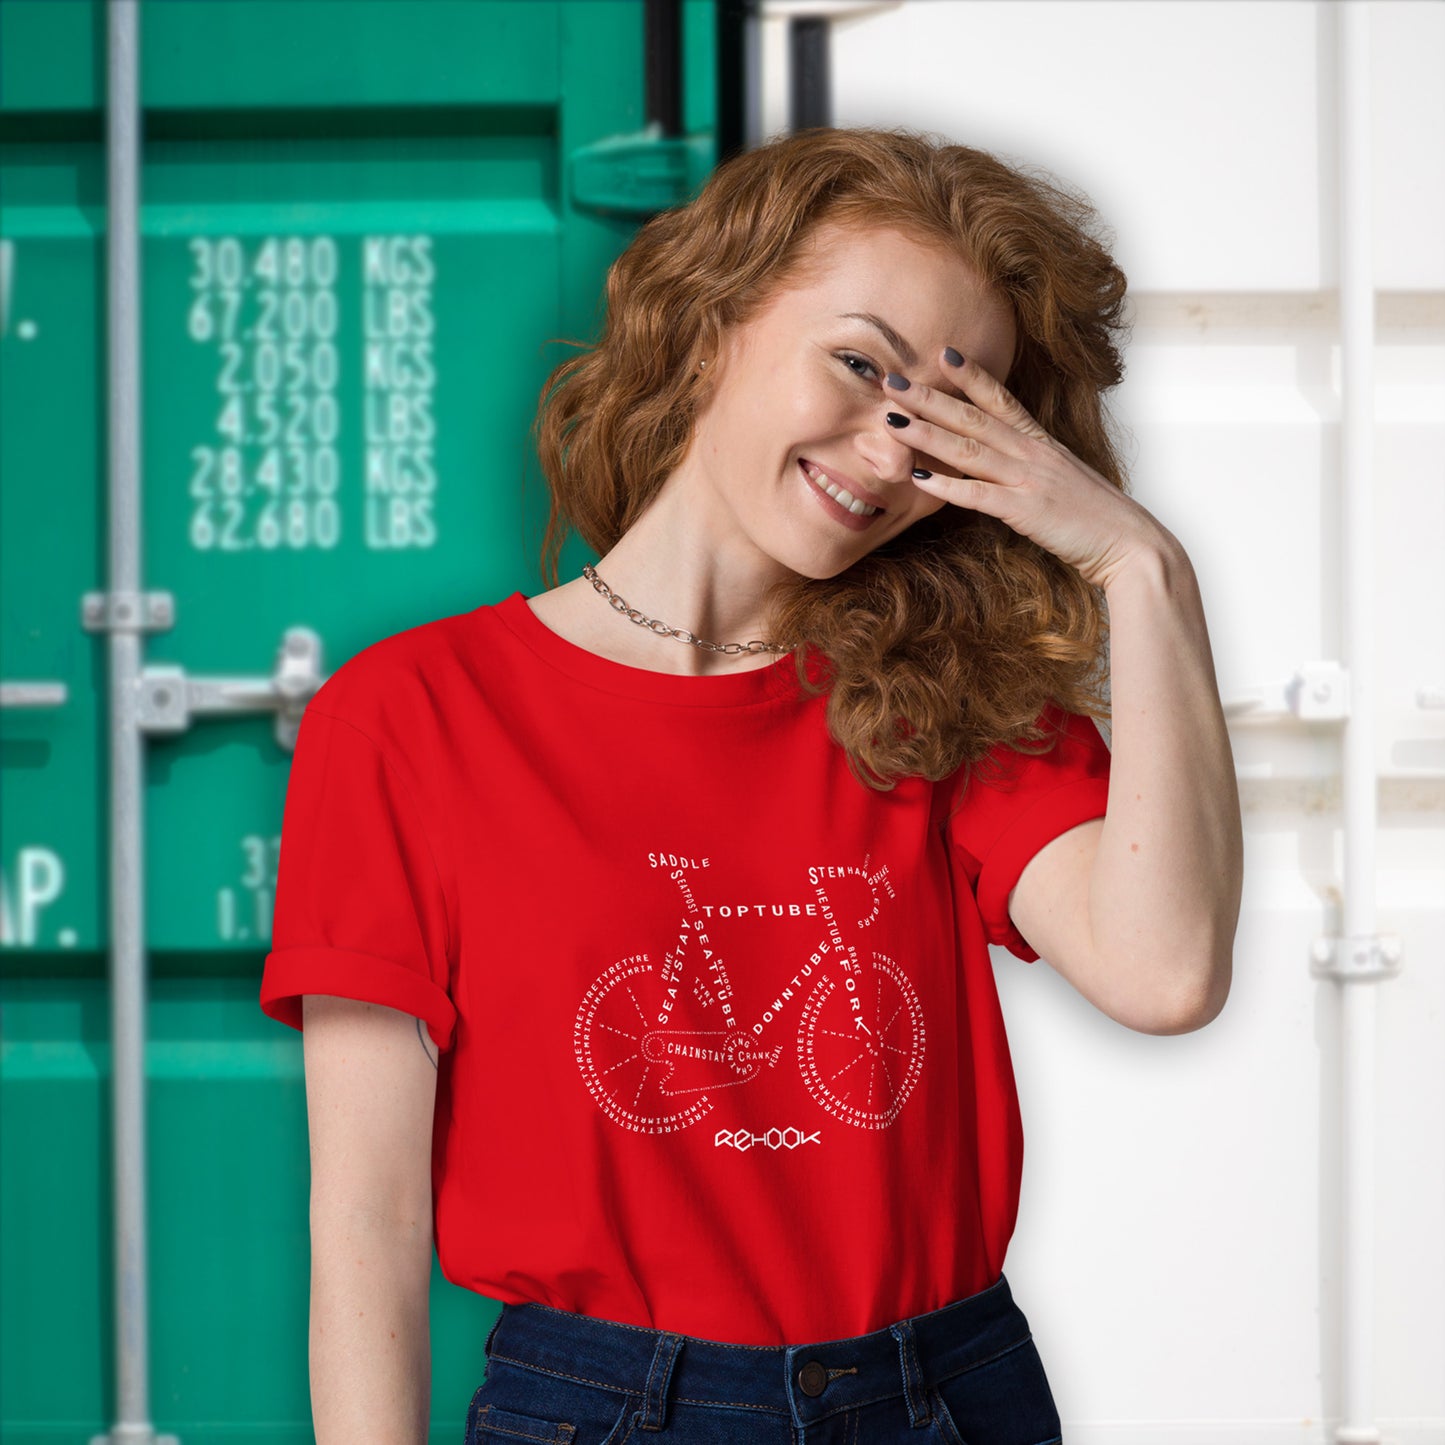 Rehook Know Your Bike Parts Women's Tee